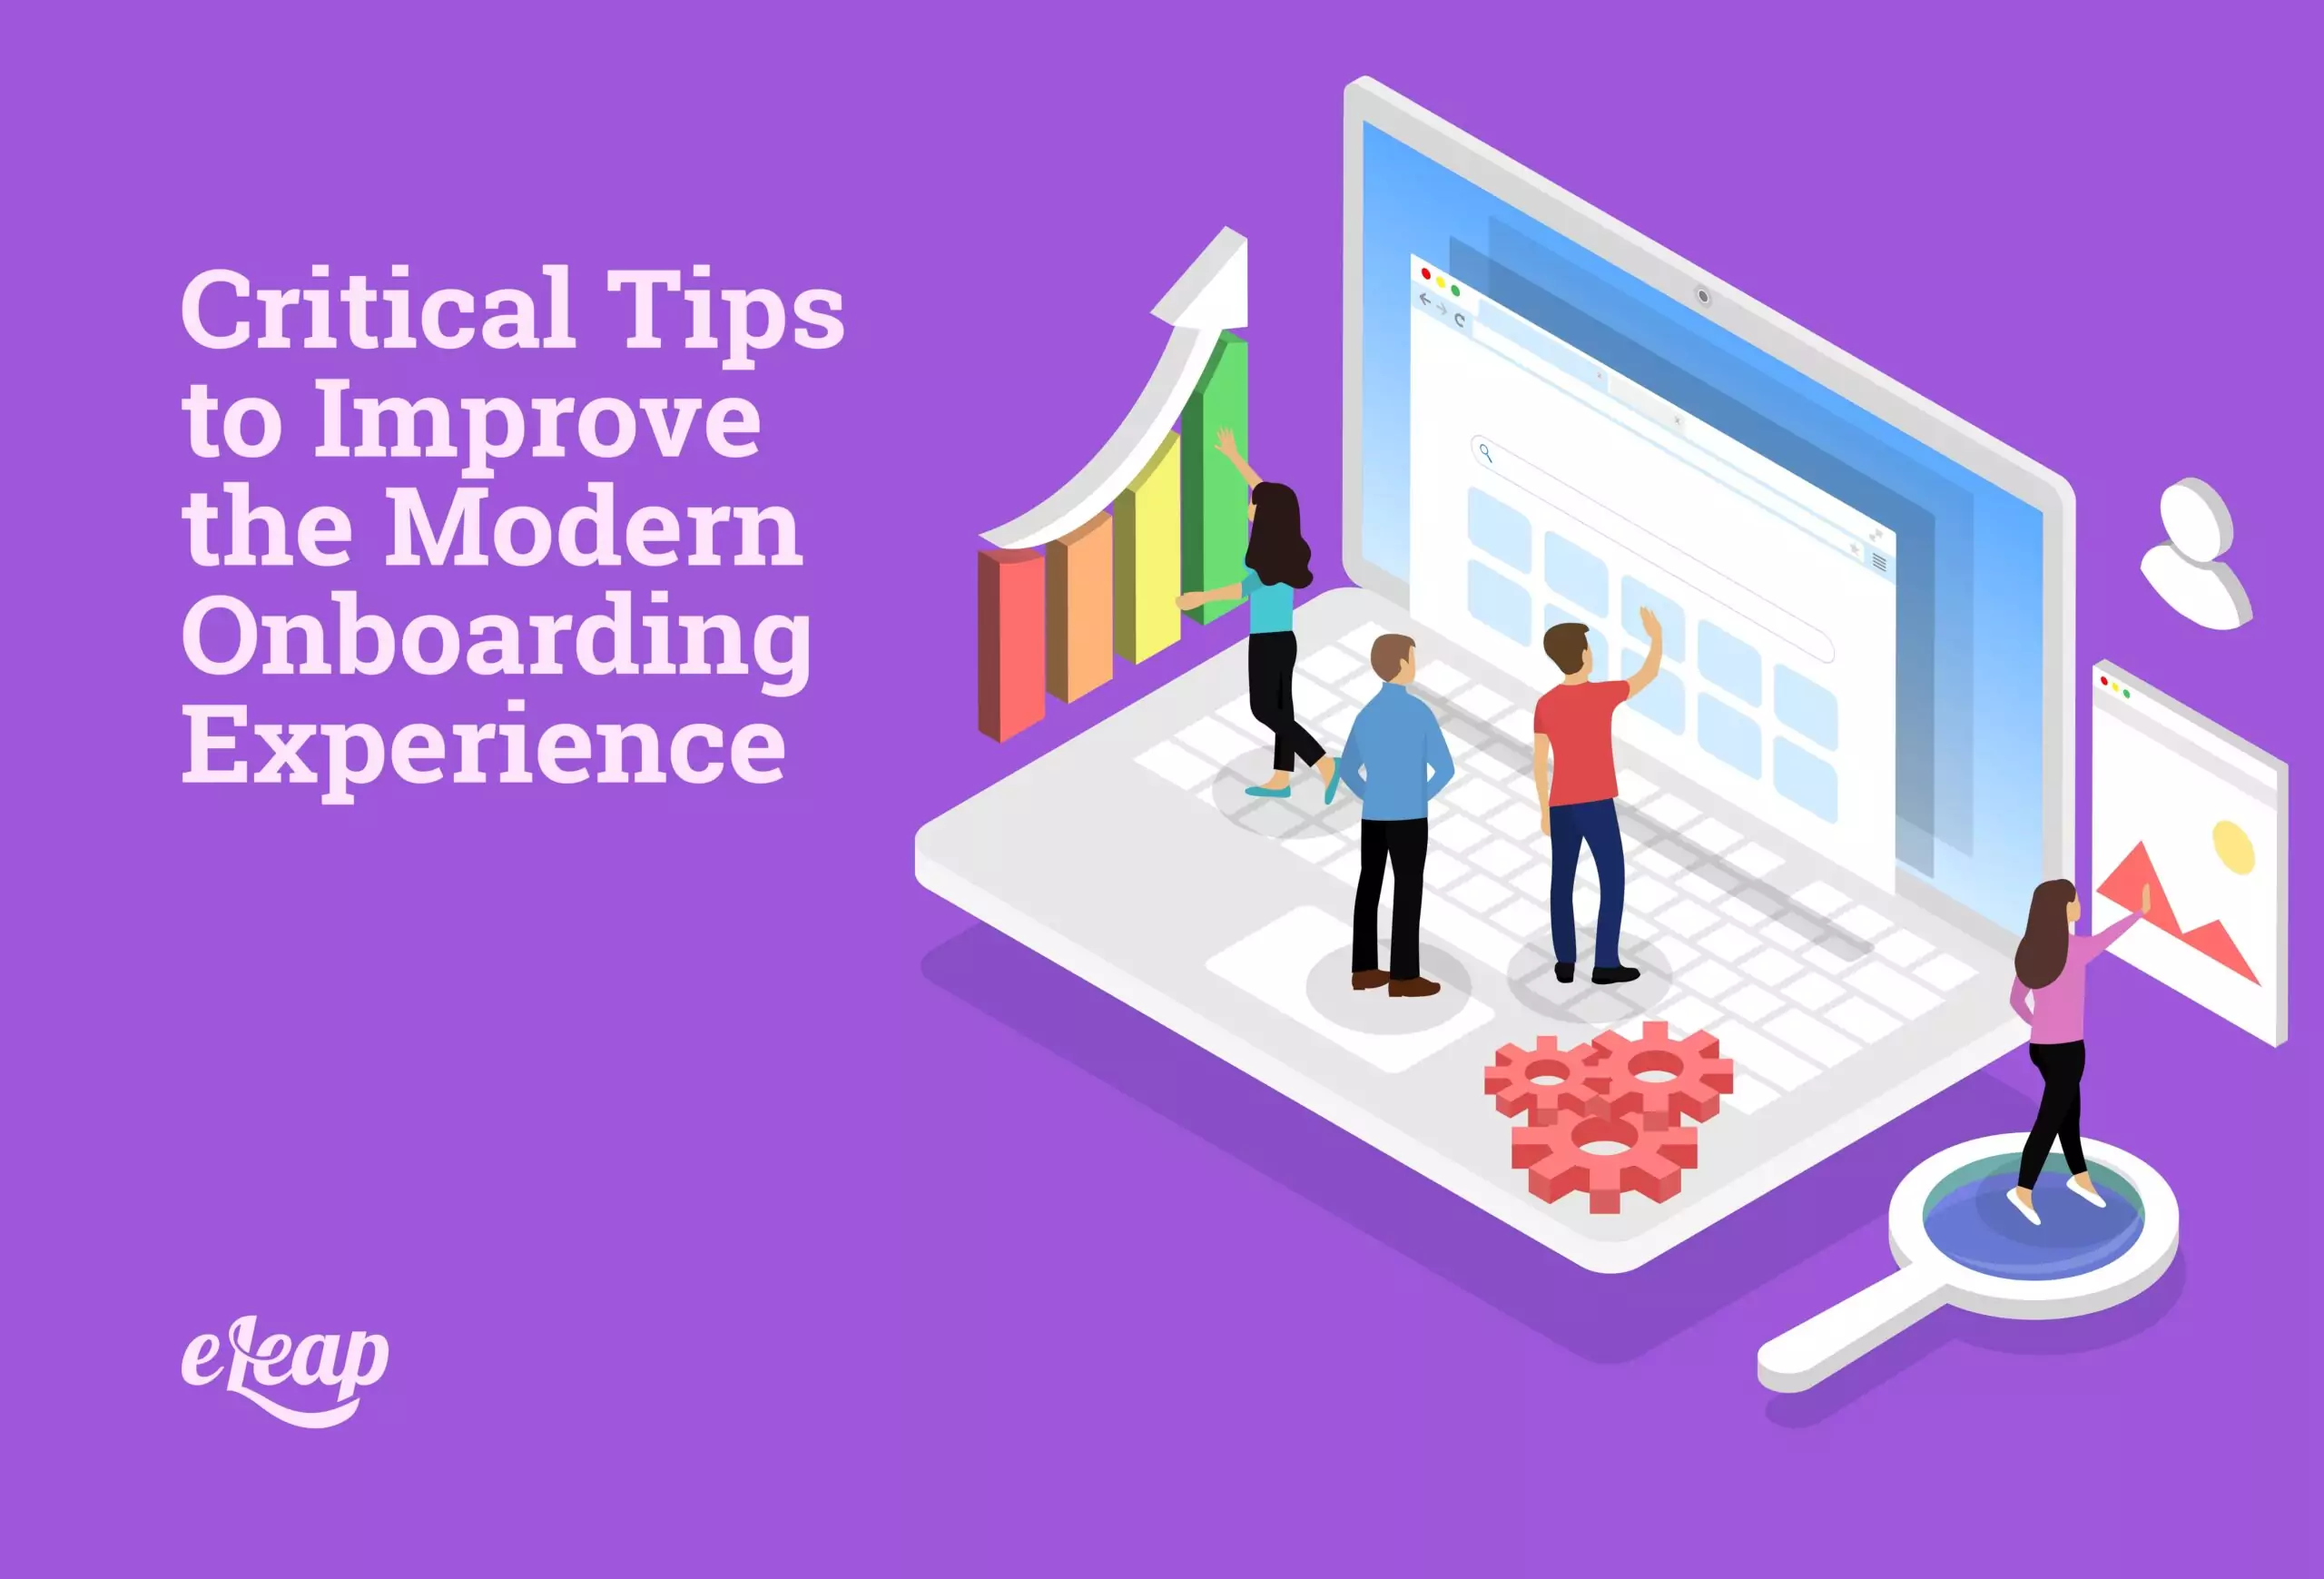 Critical Tips to Improve the Modern Onboarding Experience